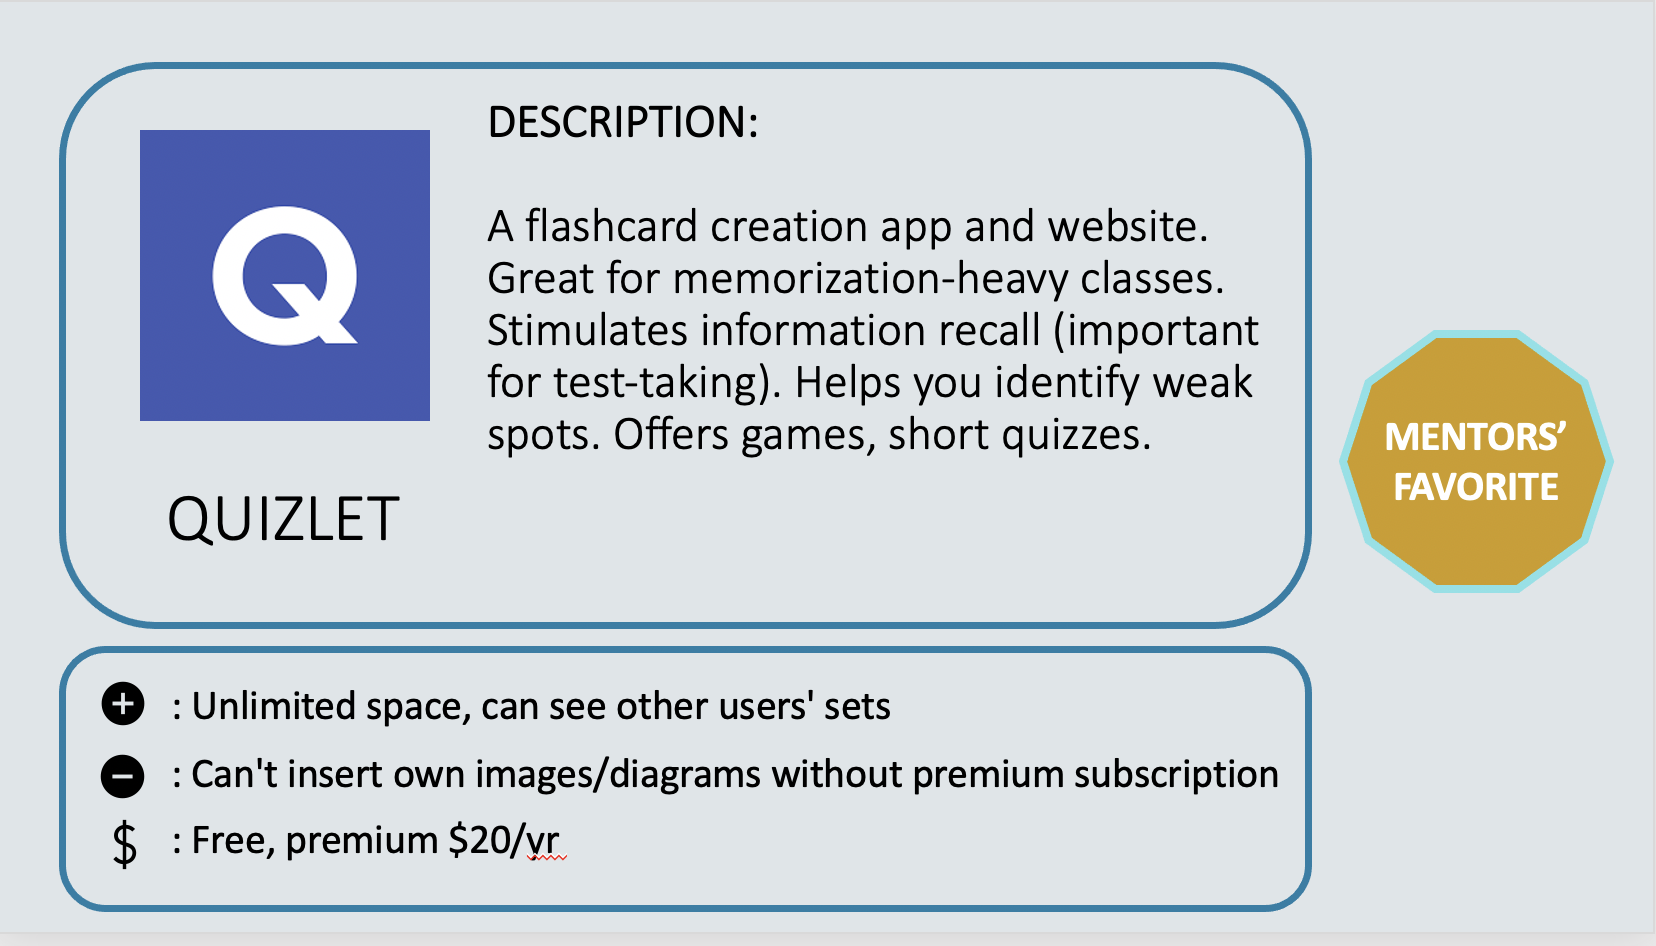 QUIZLET - A flashcard creation app and website. Great for memorization-heavy classes. Stimulates information recall (important for test-taking). Helps you identify weak spots. Offers games, short quizzes. Positive: Unlimited space, can see other users' sets. Negative: Can't insert own images/diagrams without premium subscription. Cost: Free, premium $20/yr